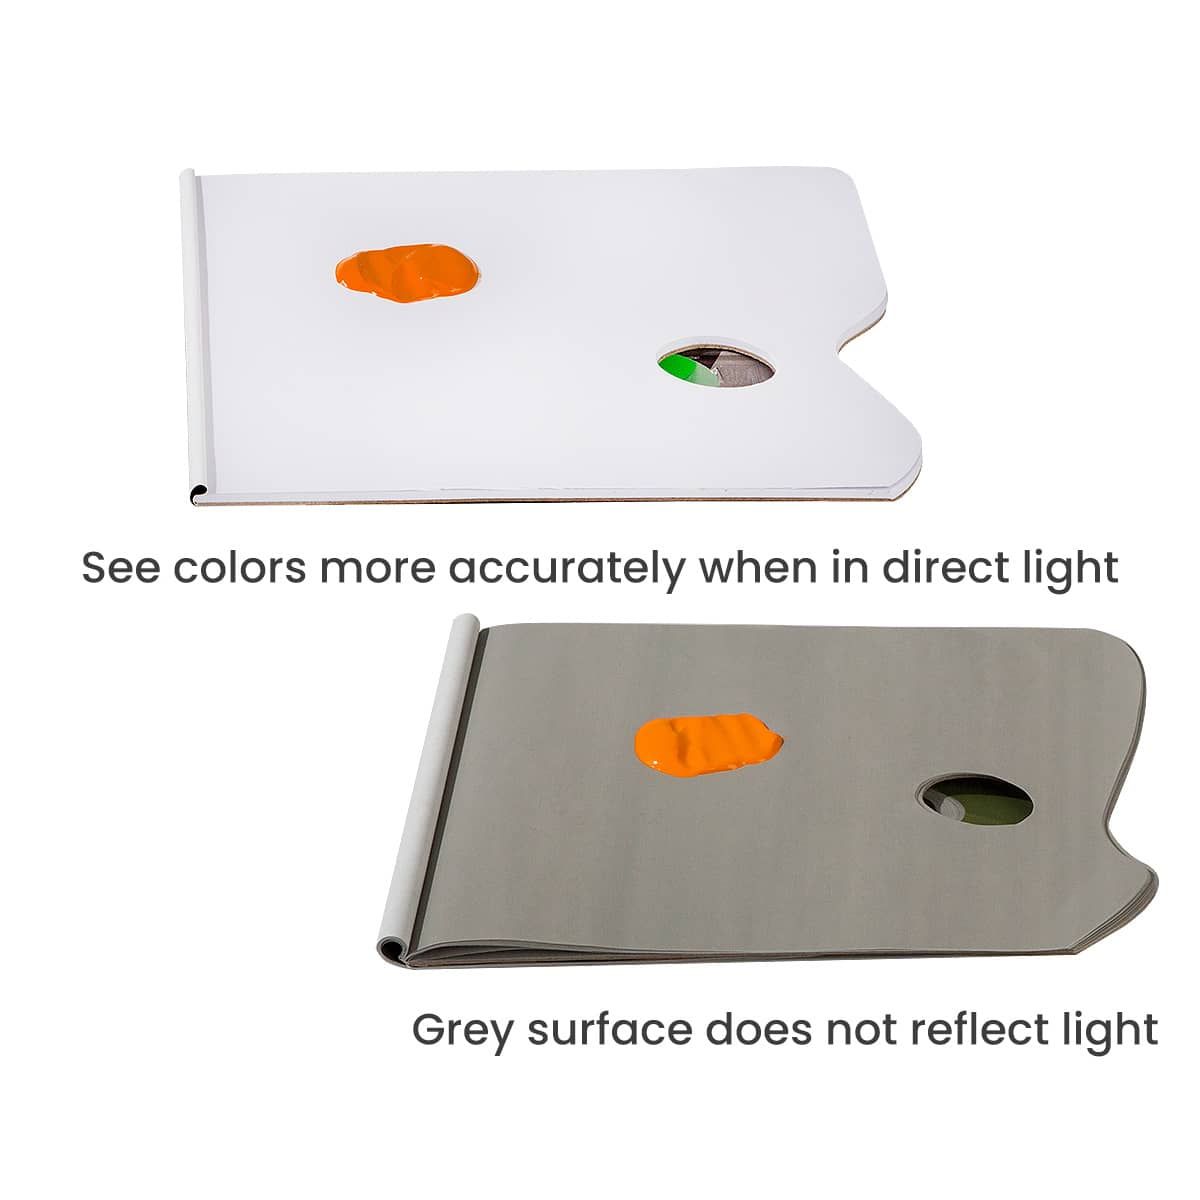 See colors more accurately - Grey surface does not reflect light